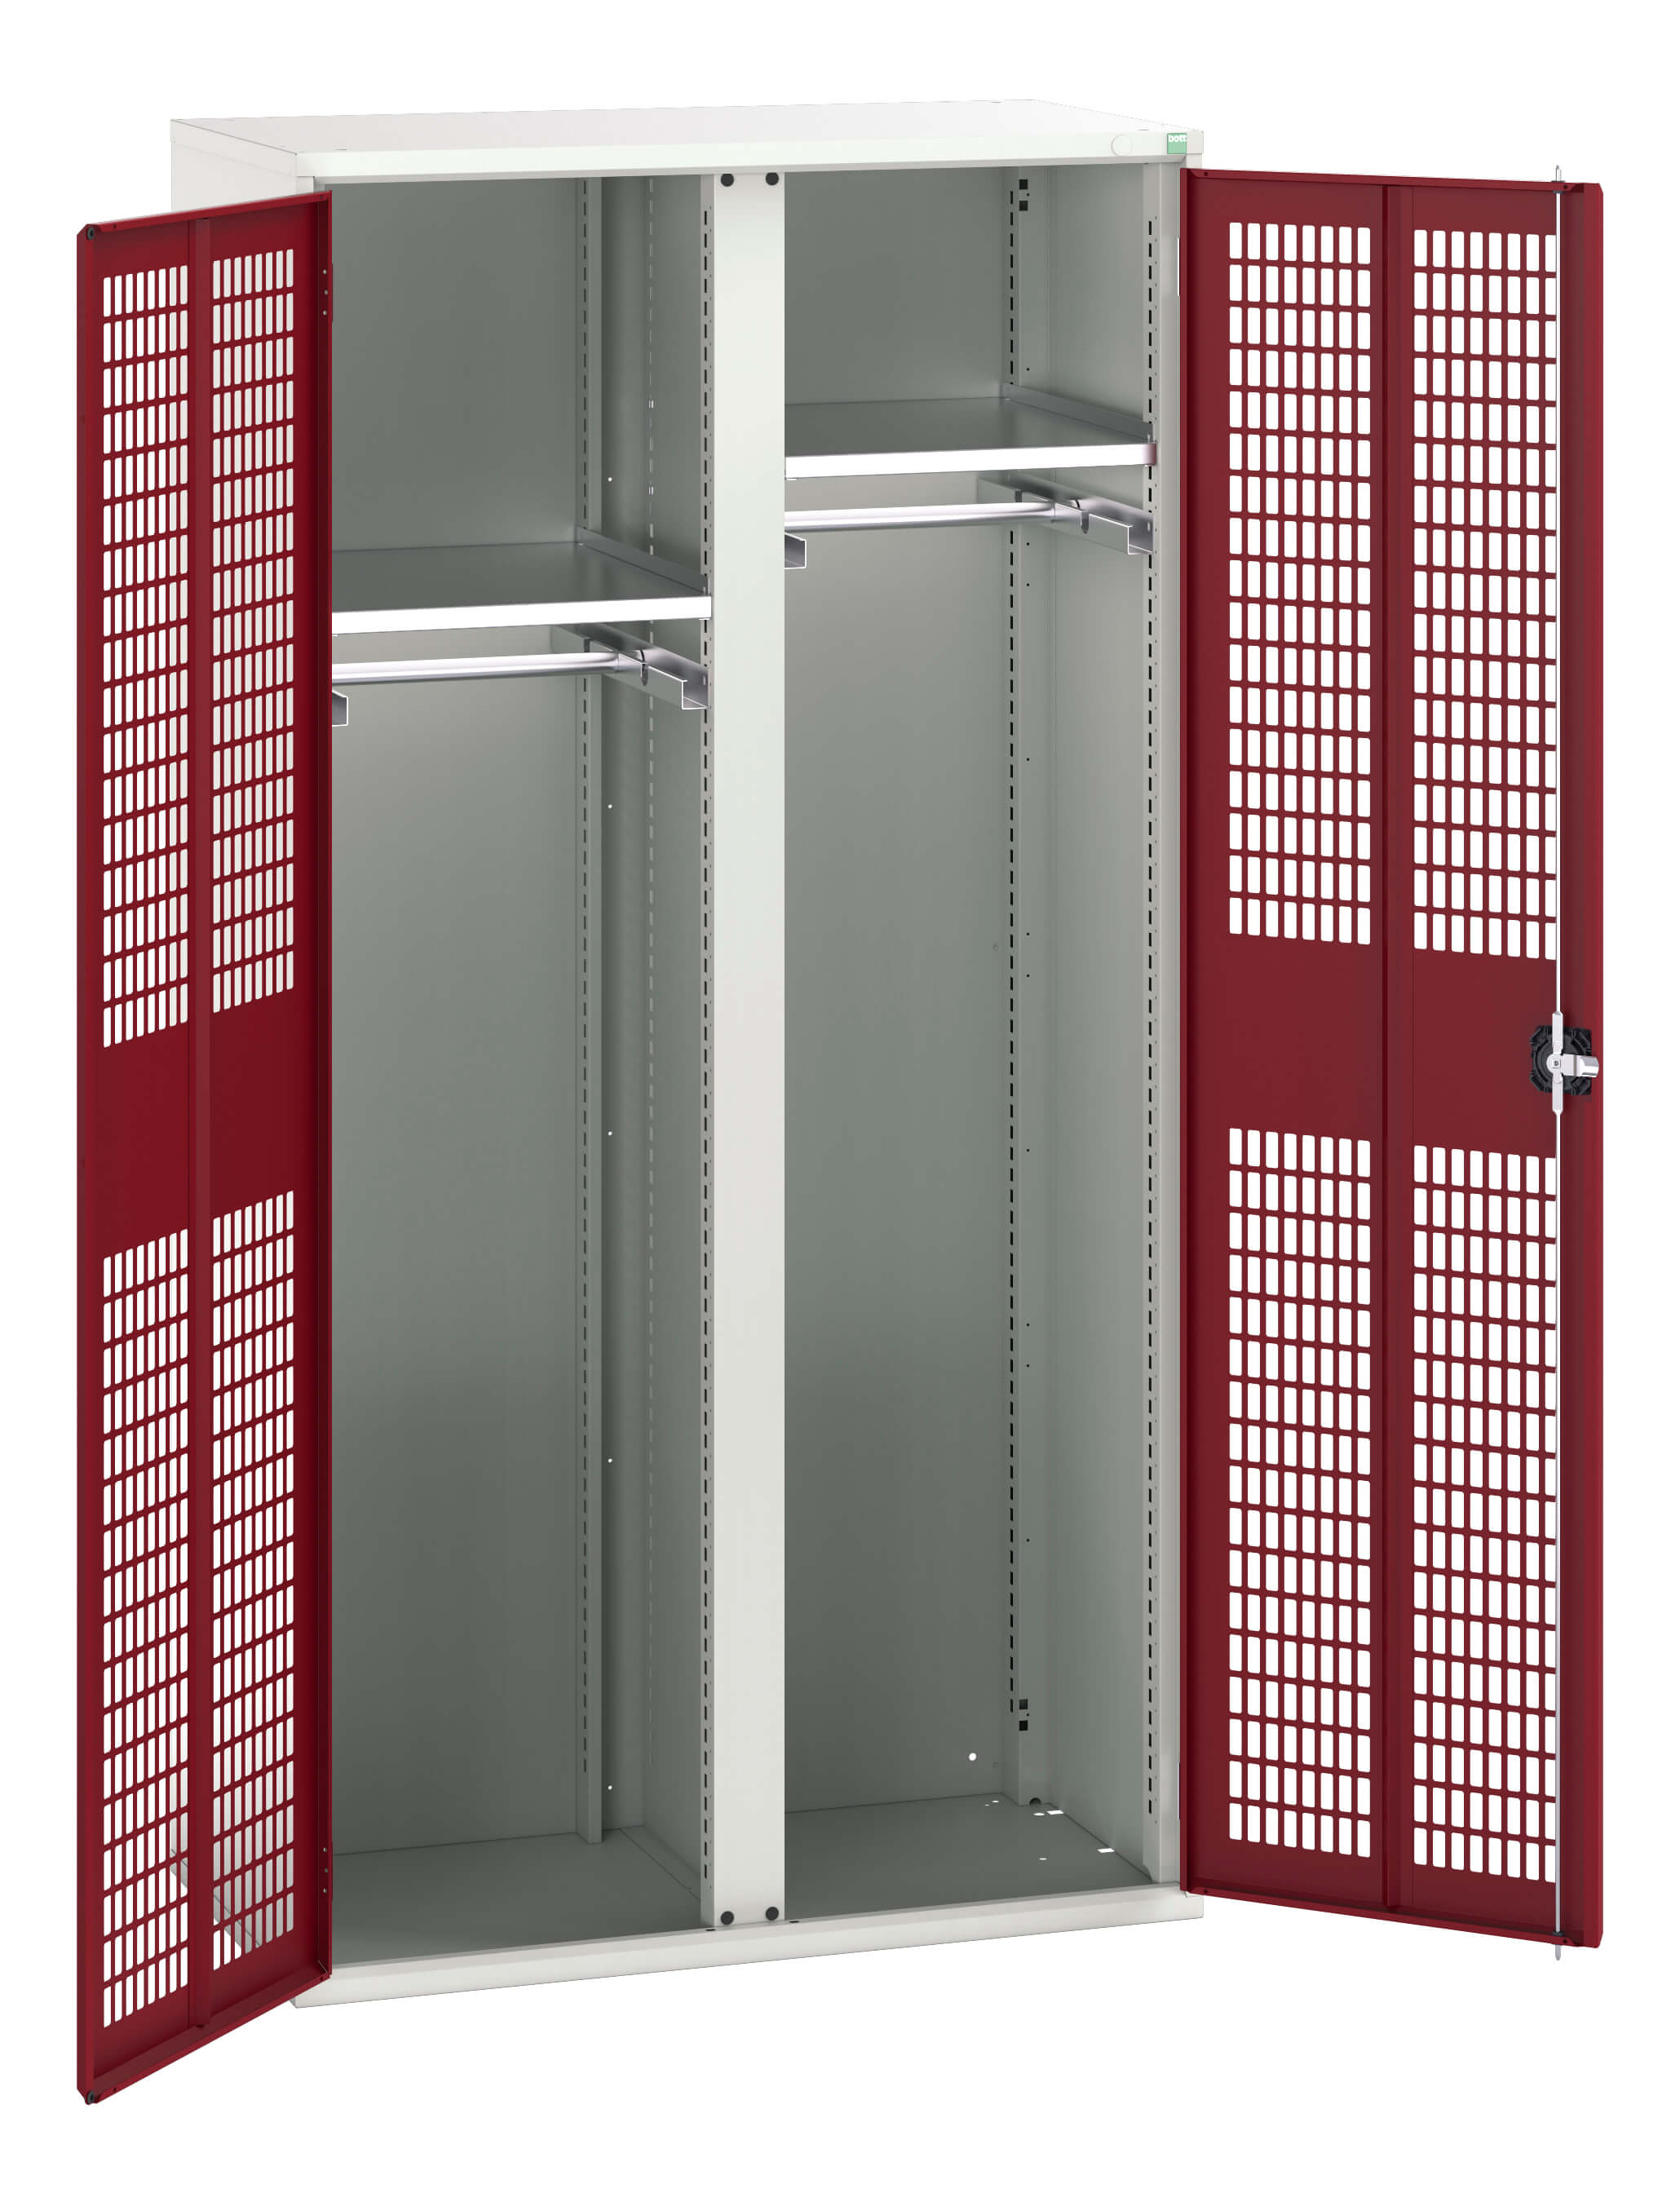 Bott Verso Ventilated Door Ppe / Janitorial Kitted Cupboard With Vertical Partition - 16926773.24